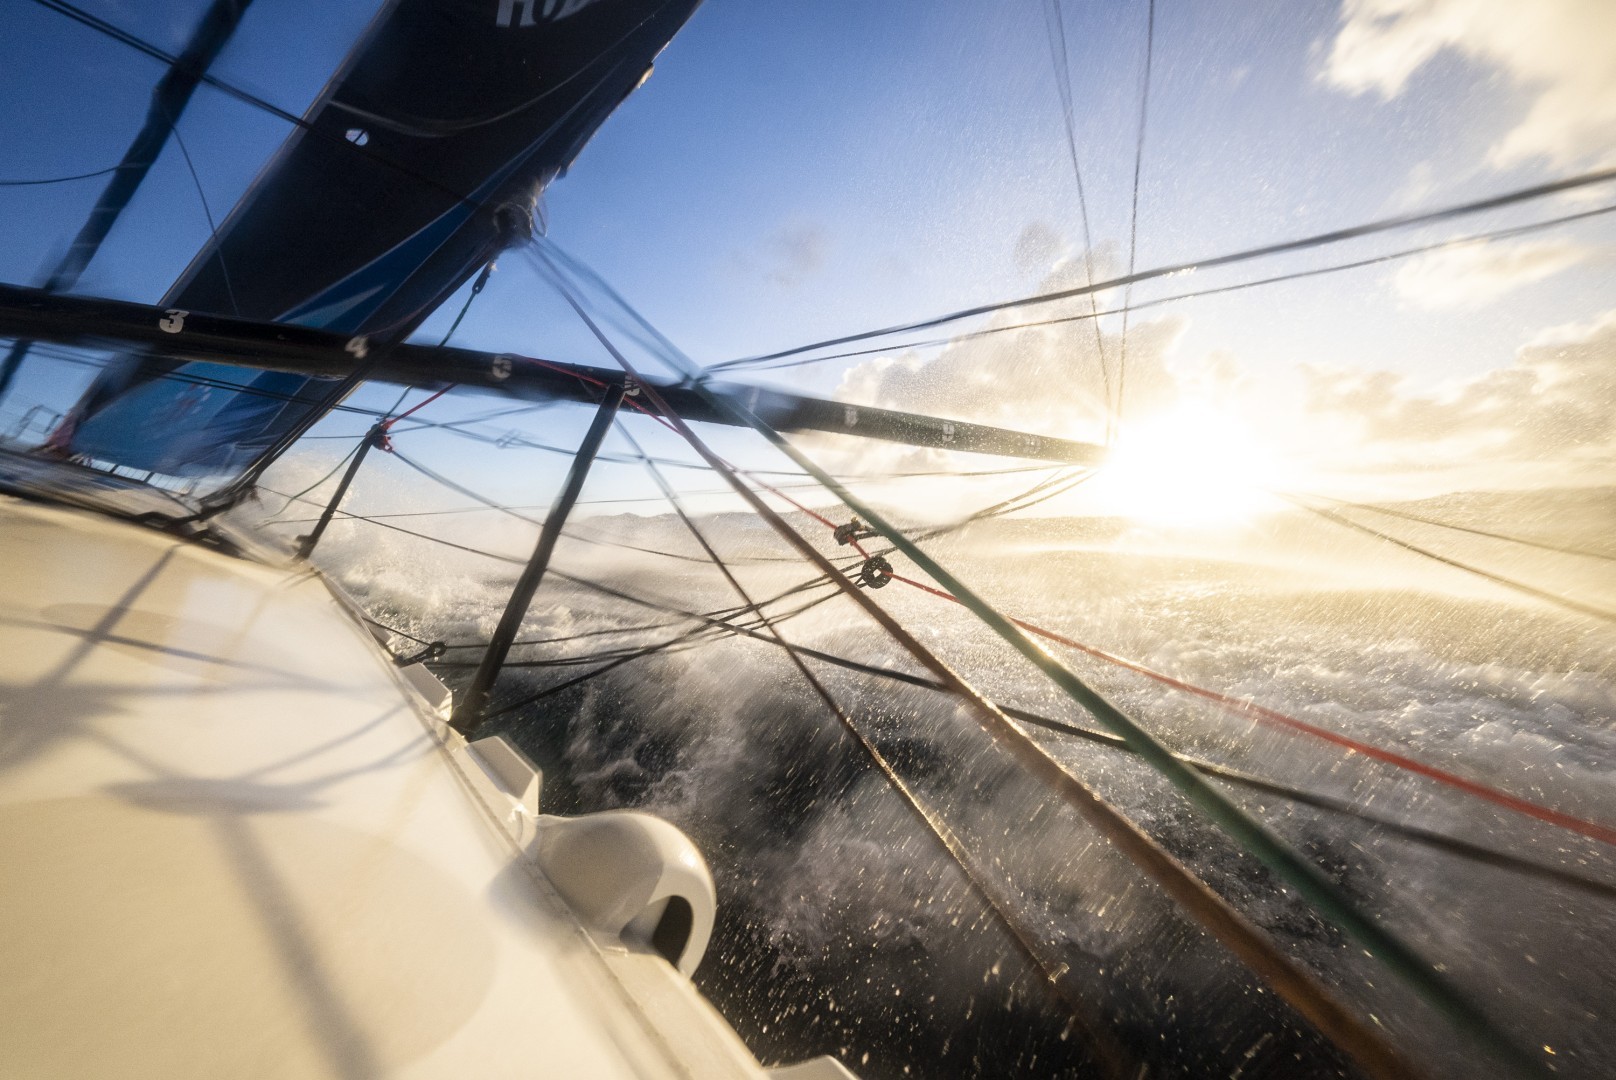 The Ocean Race 2022-23 - May 07 2023, Leg 4 Day 14 onboard 11th Hour Racing Team. Malama going upwind at sunrise in a messy sea state.
© Amory Ross / 11th Hour Racing / The Ocean Race